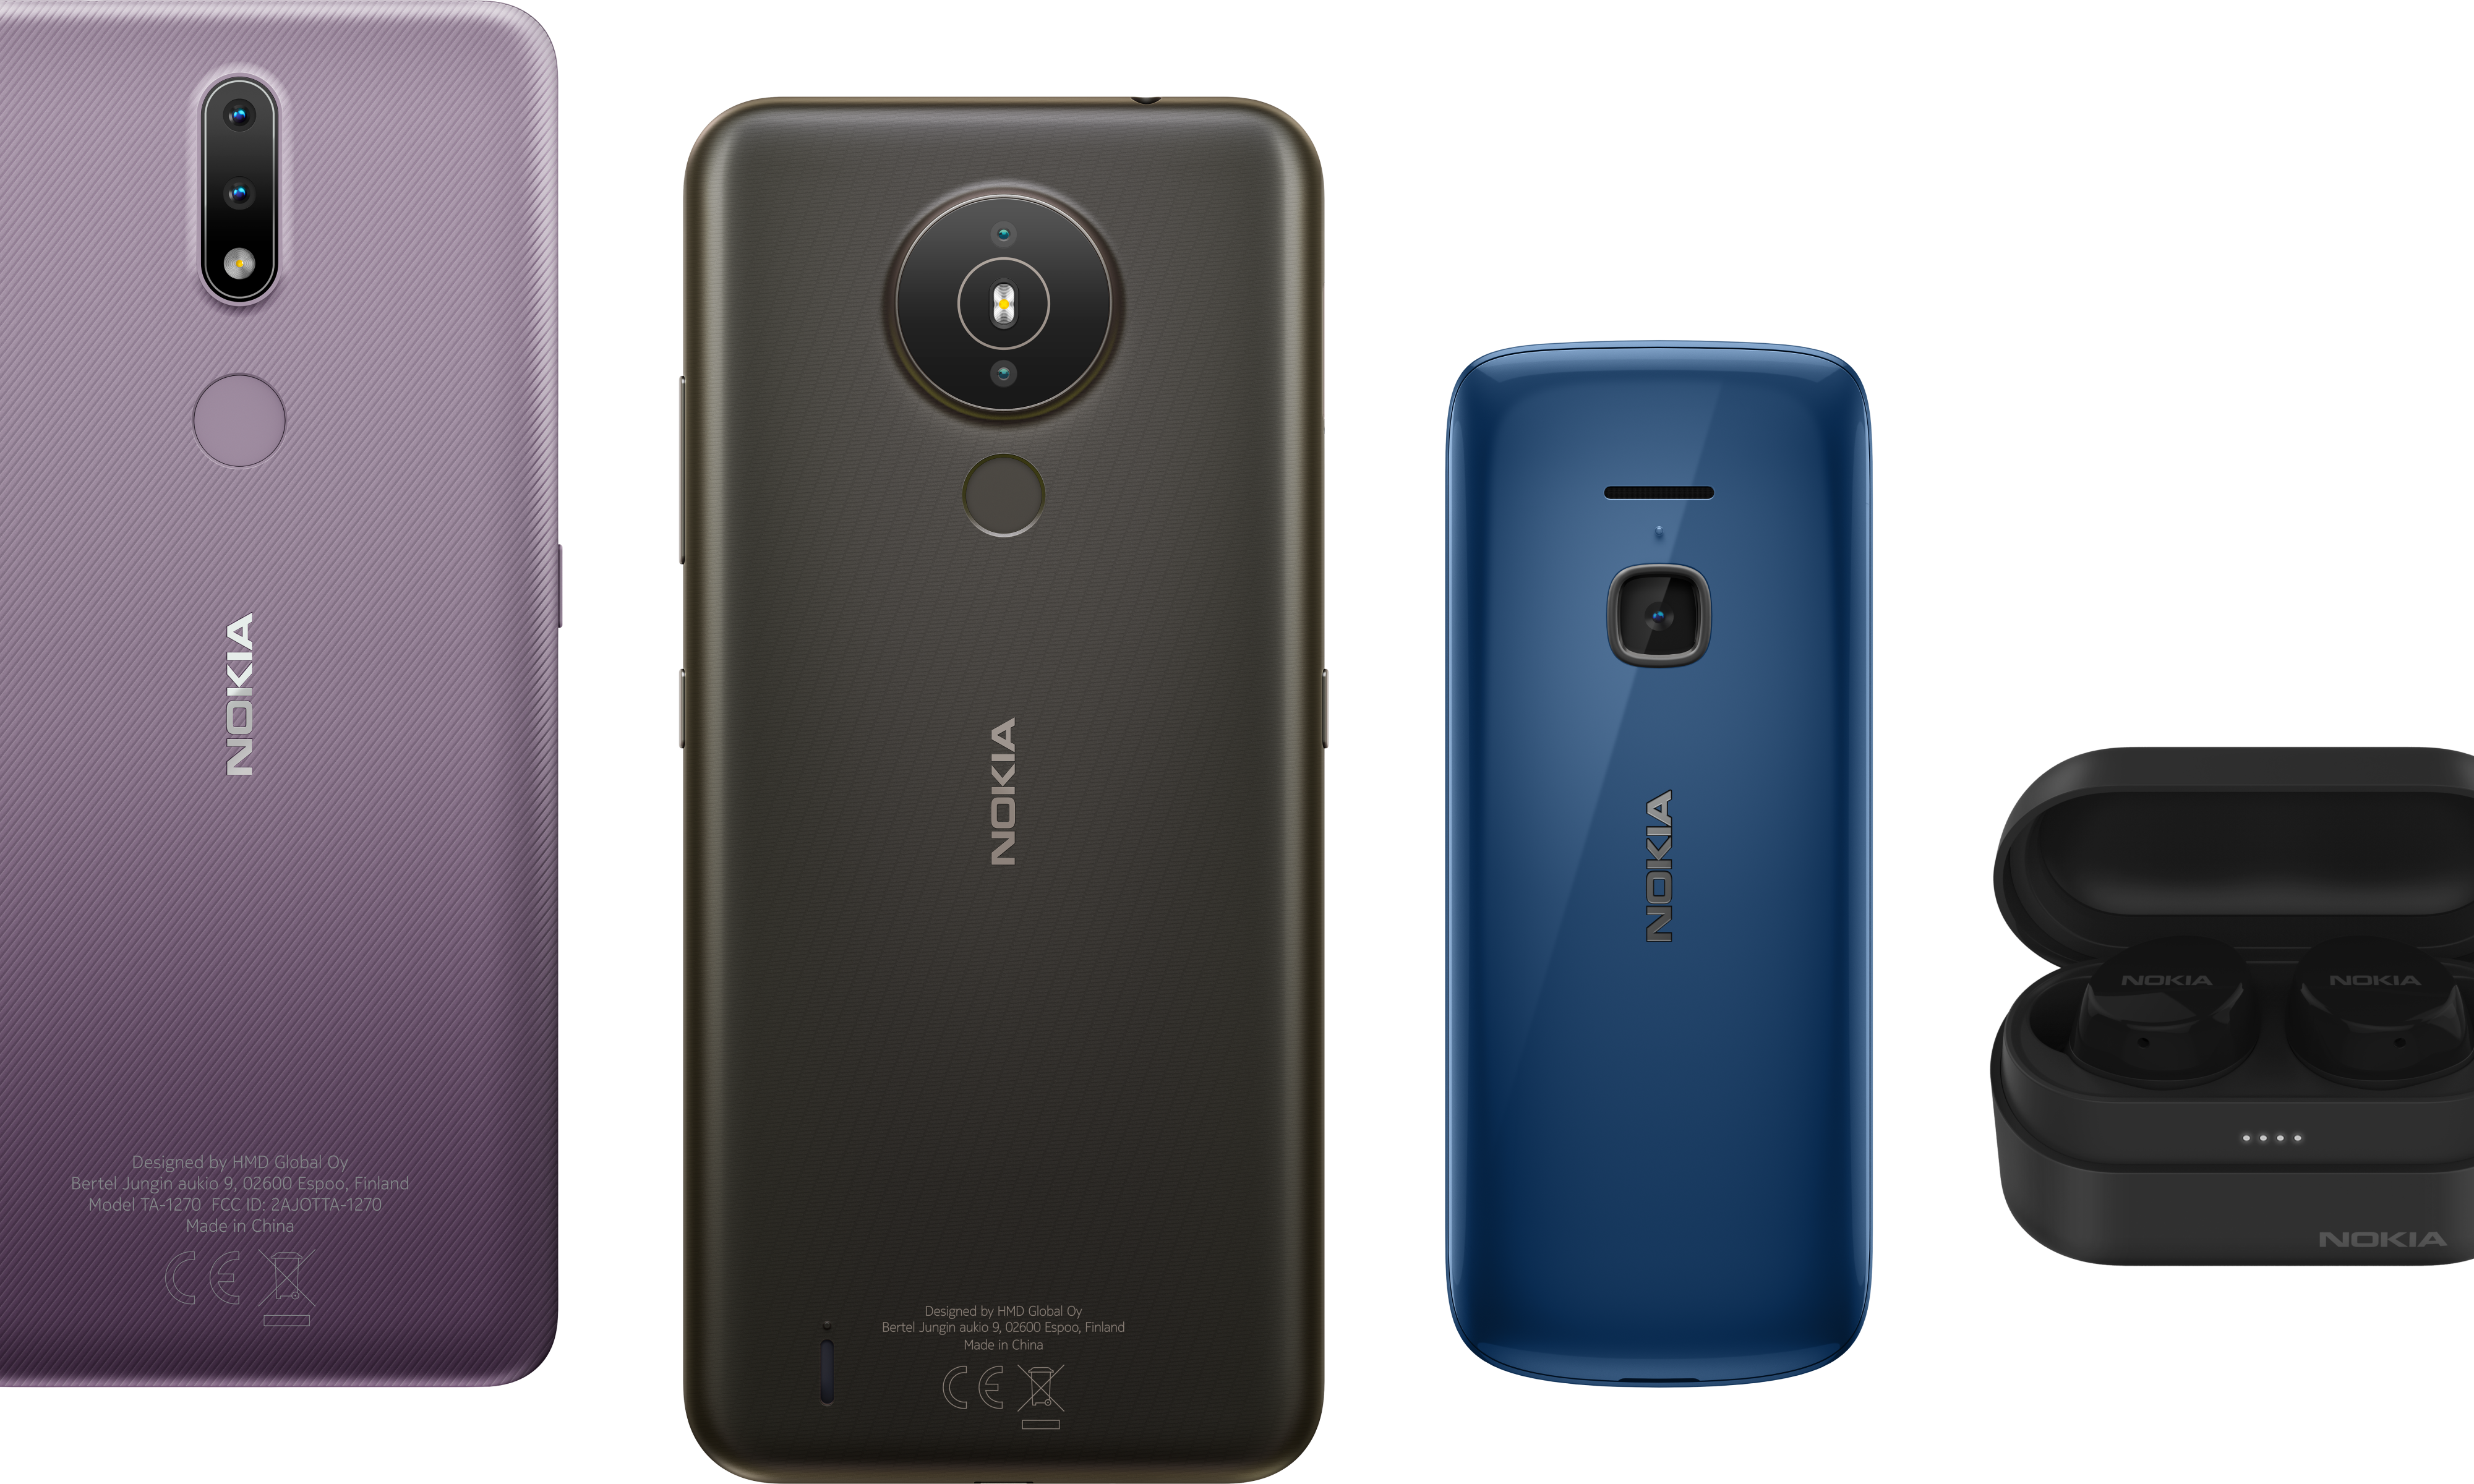 nokia mobiles with price list